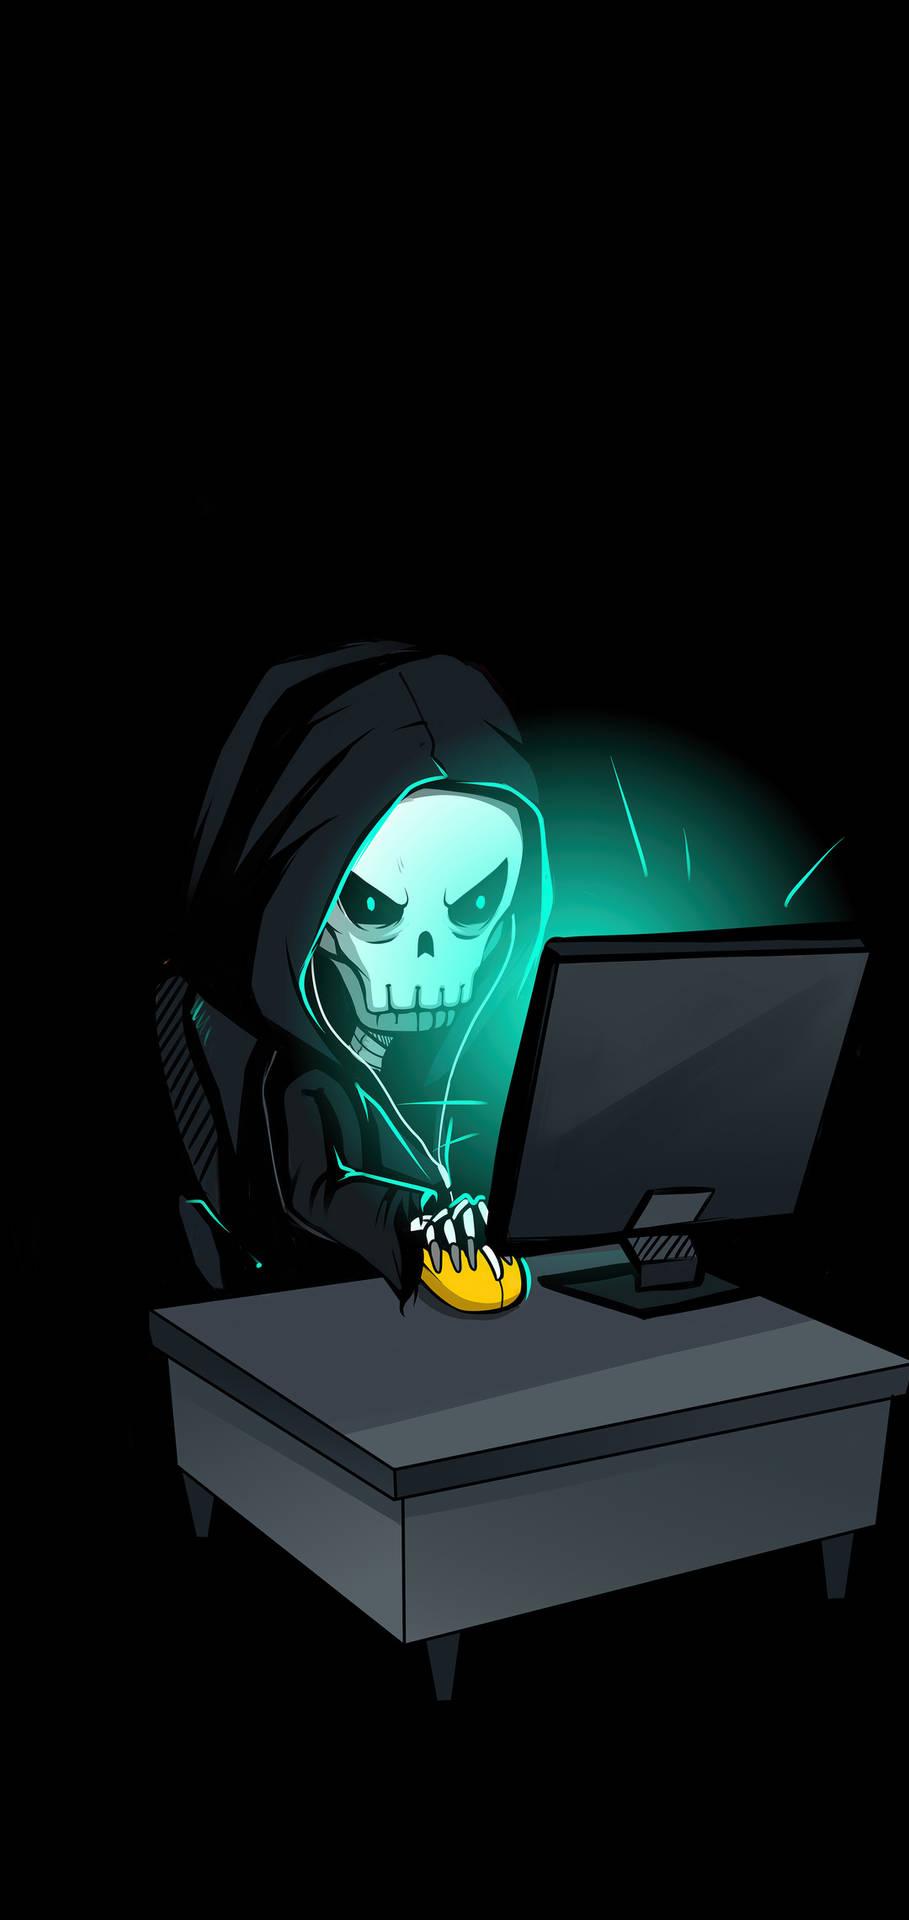 Graphic Skull With Computer Hacking Android